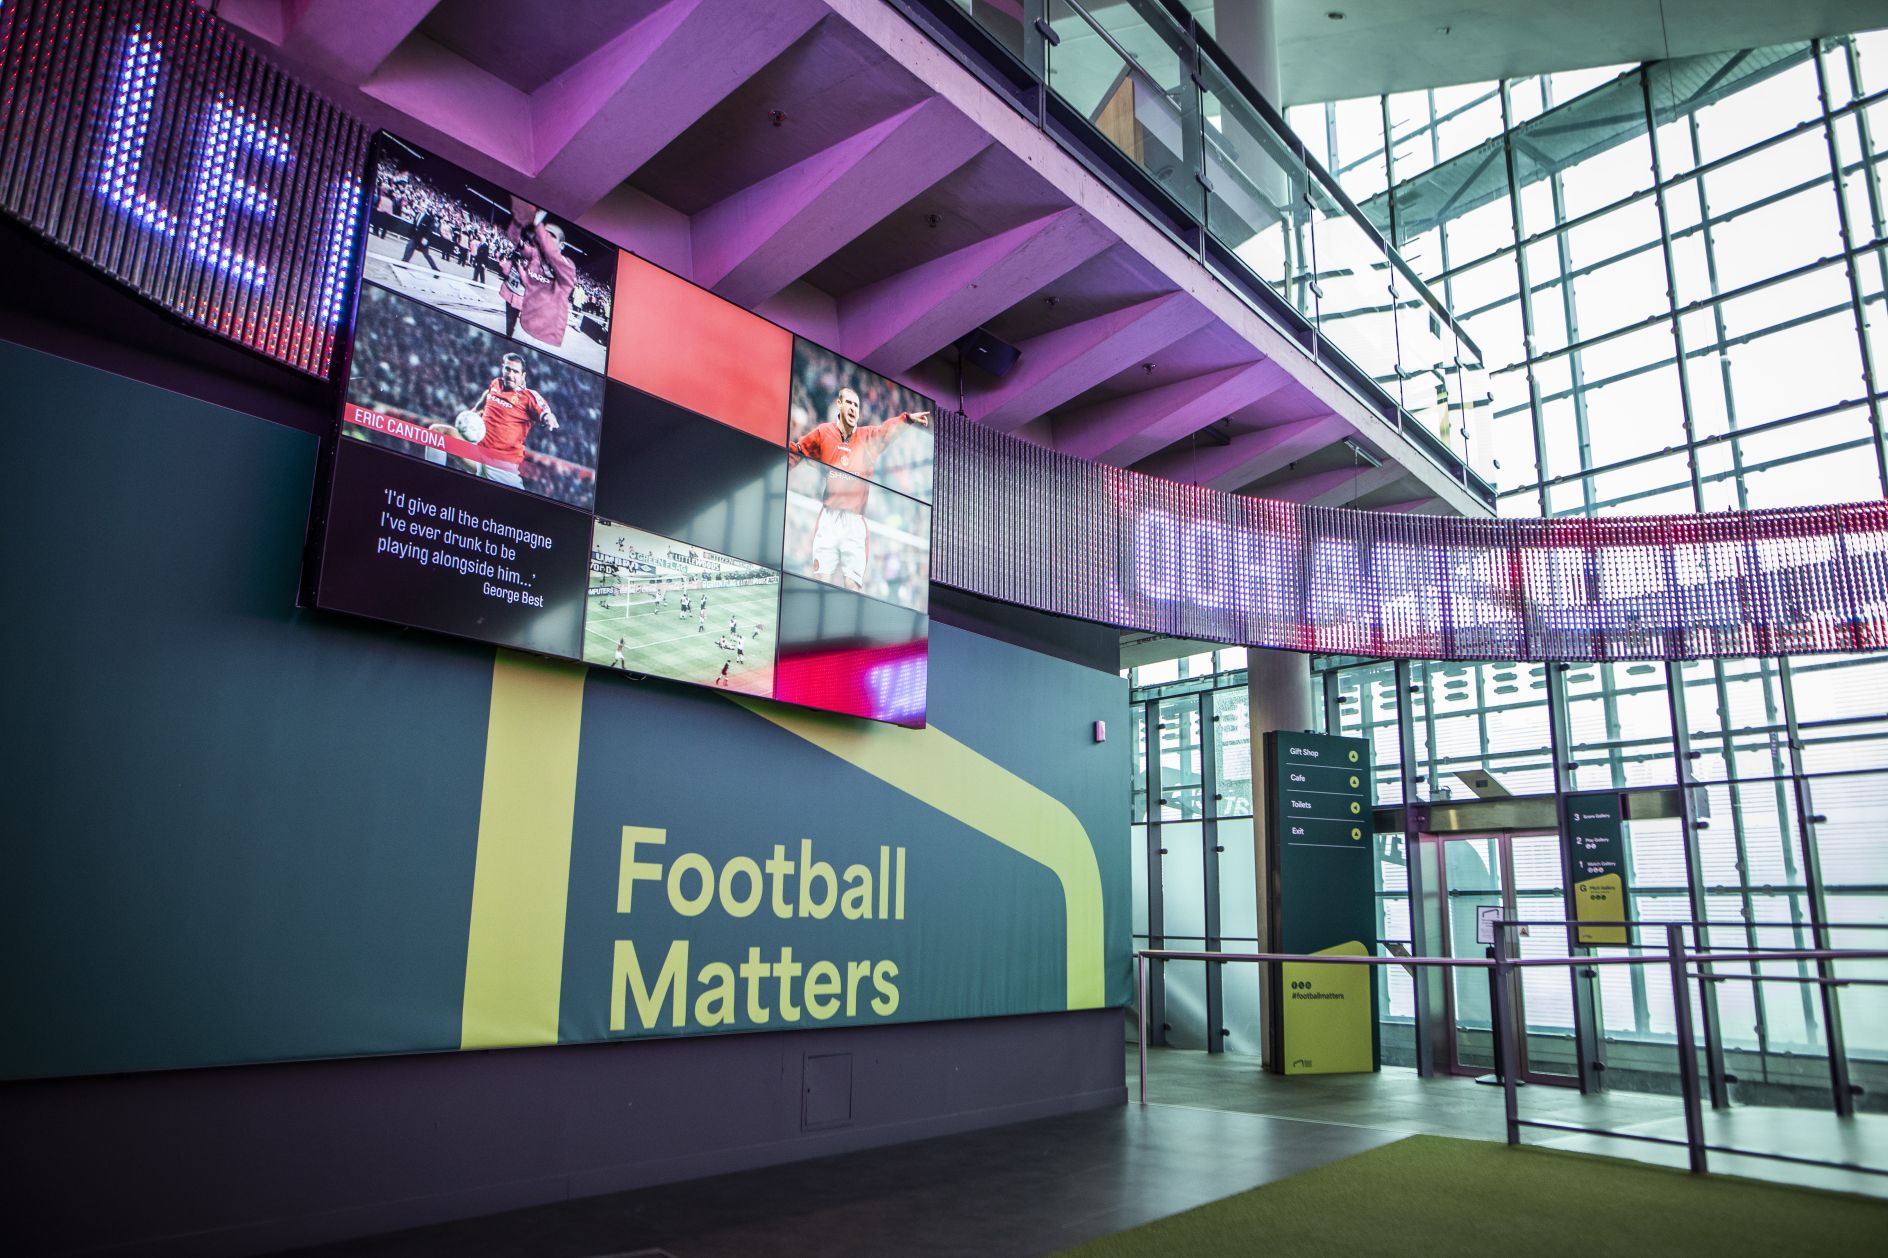 National Football Museum's